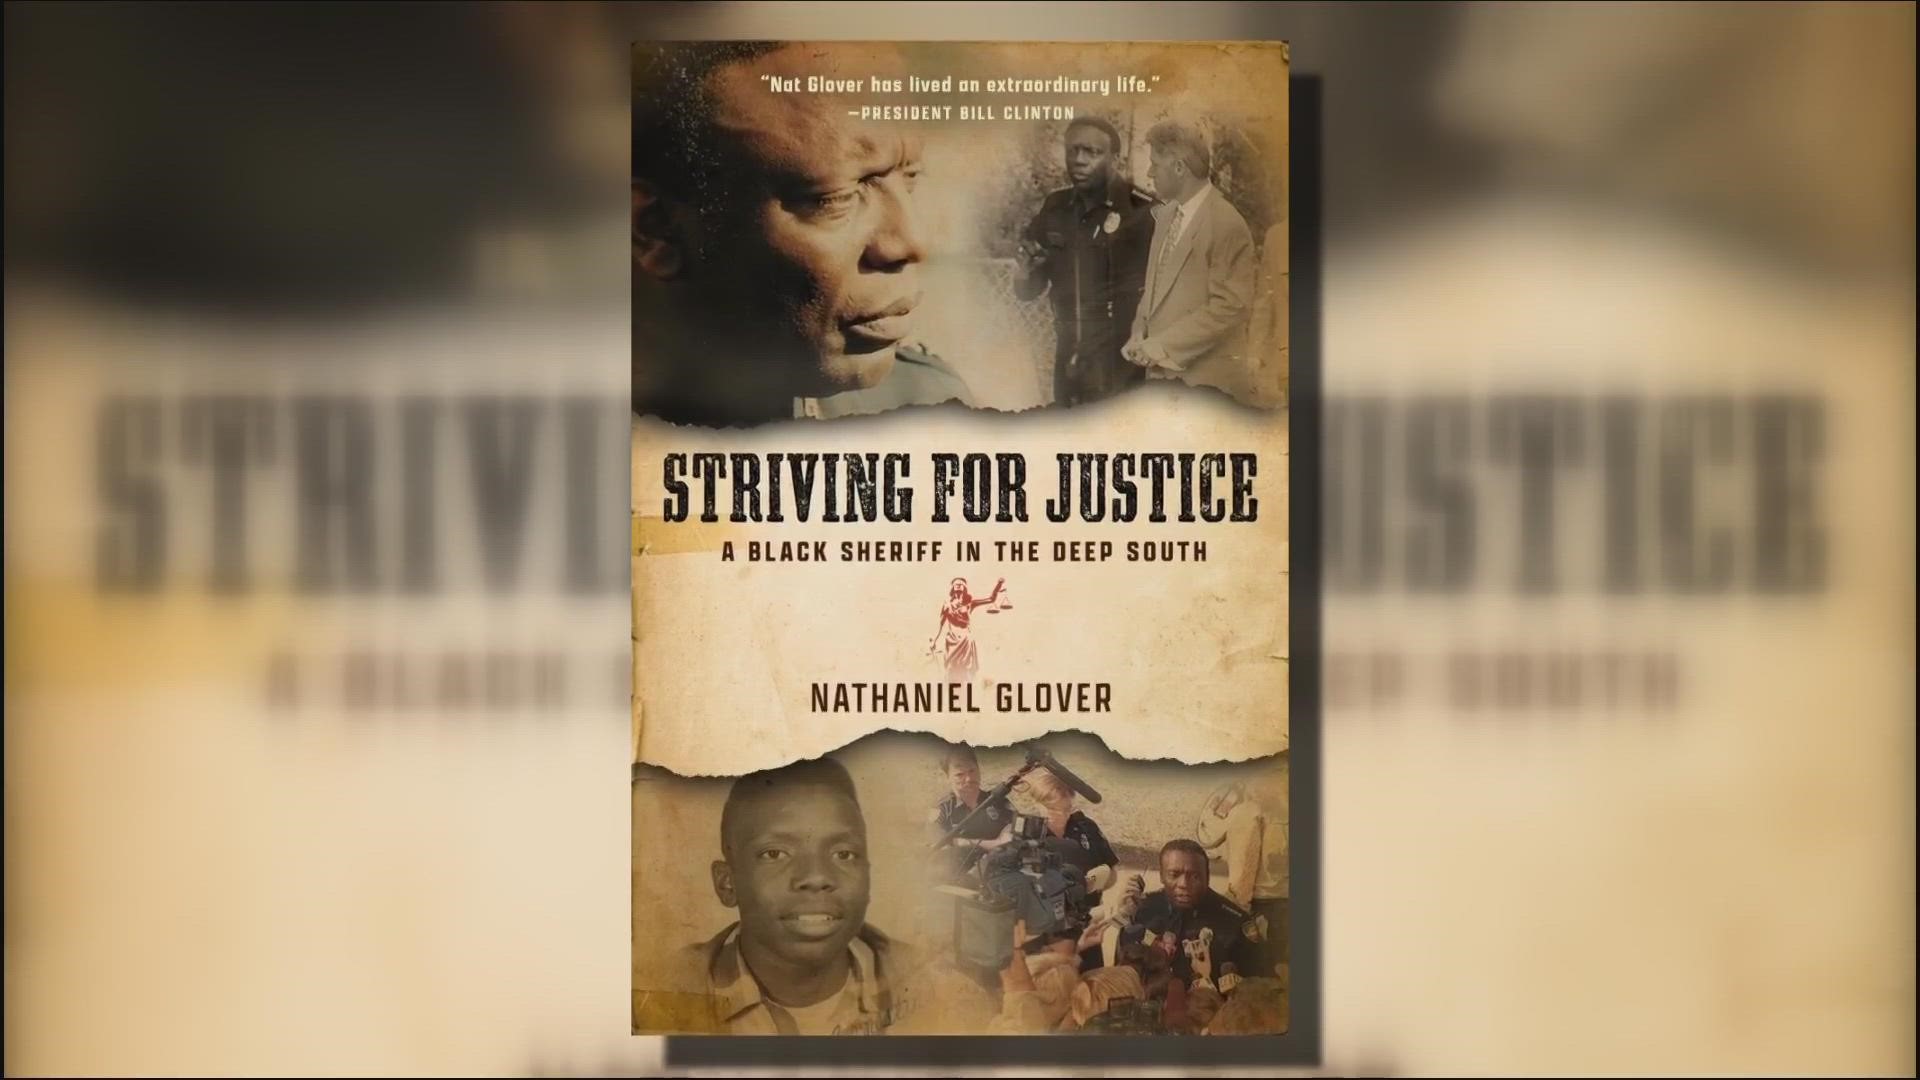 His book is called 'Striving for Justice'.